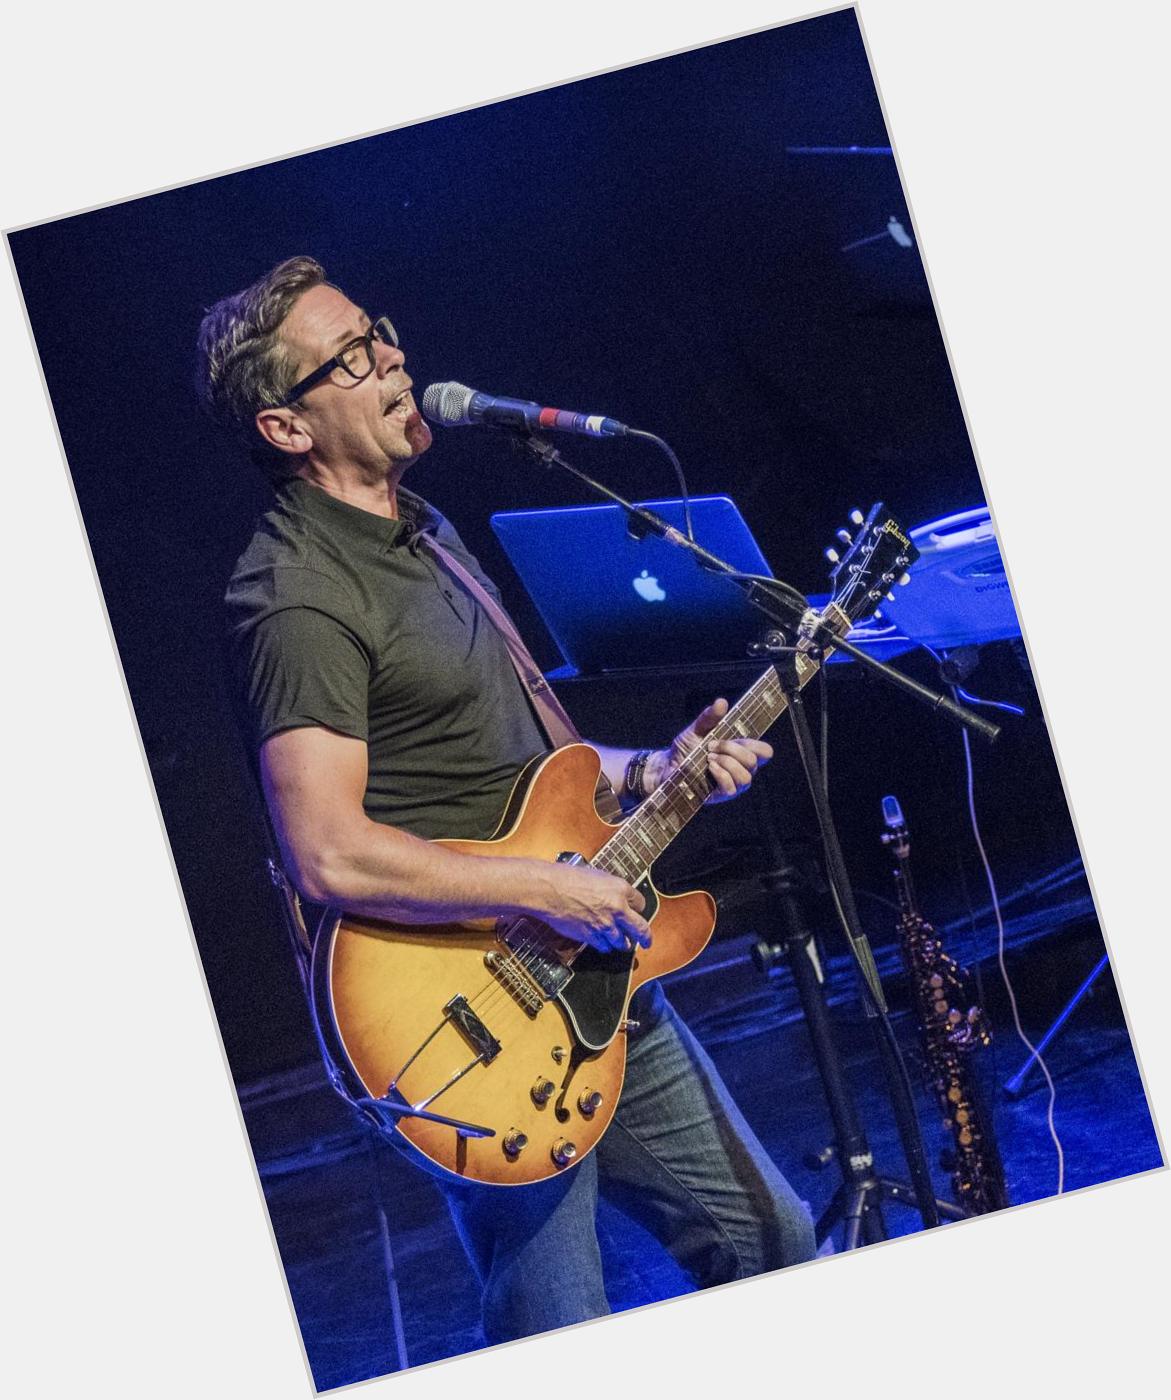 Happy birthday wishes today also to Nick Heyward of Haircut 100. 